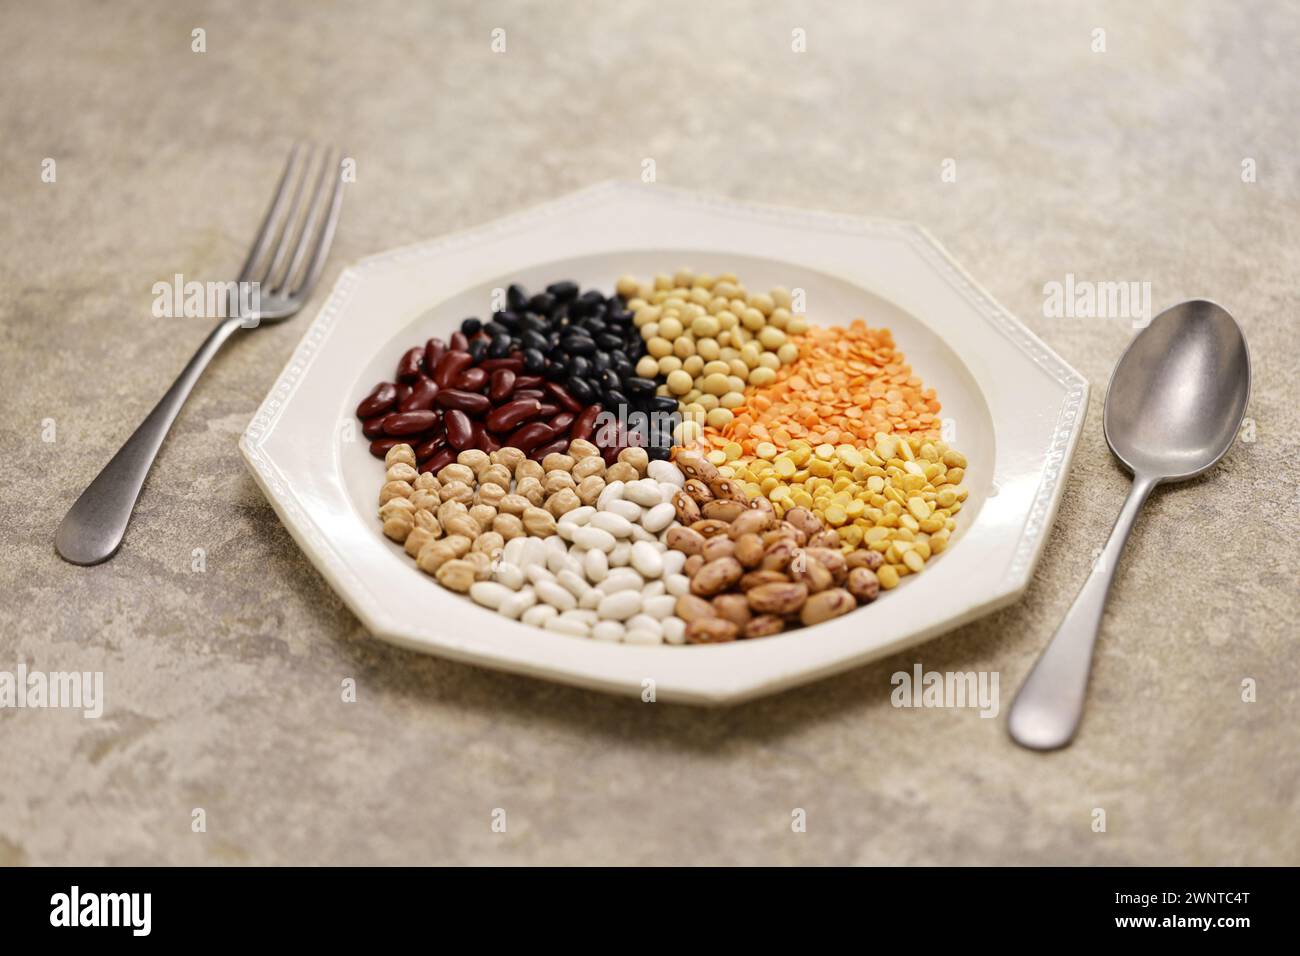 By eating beans, Let's survive the world food crisis. Stock Photo